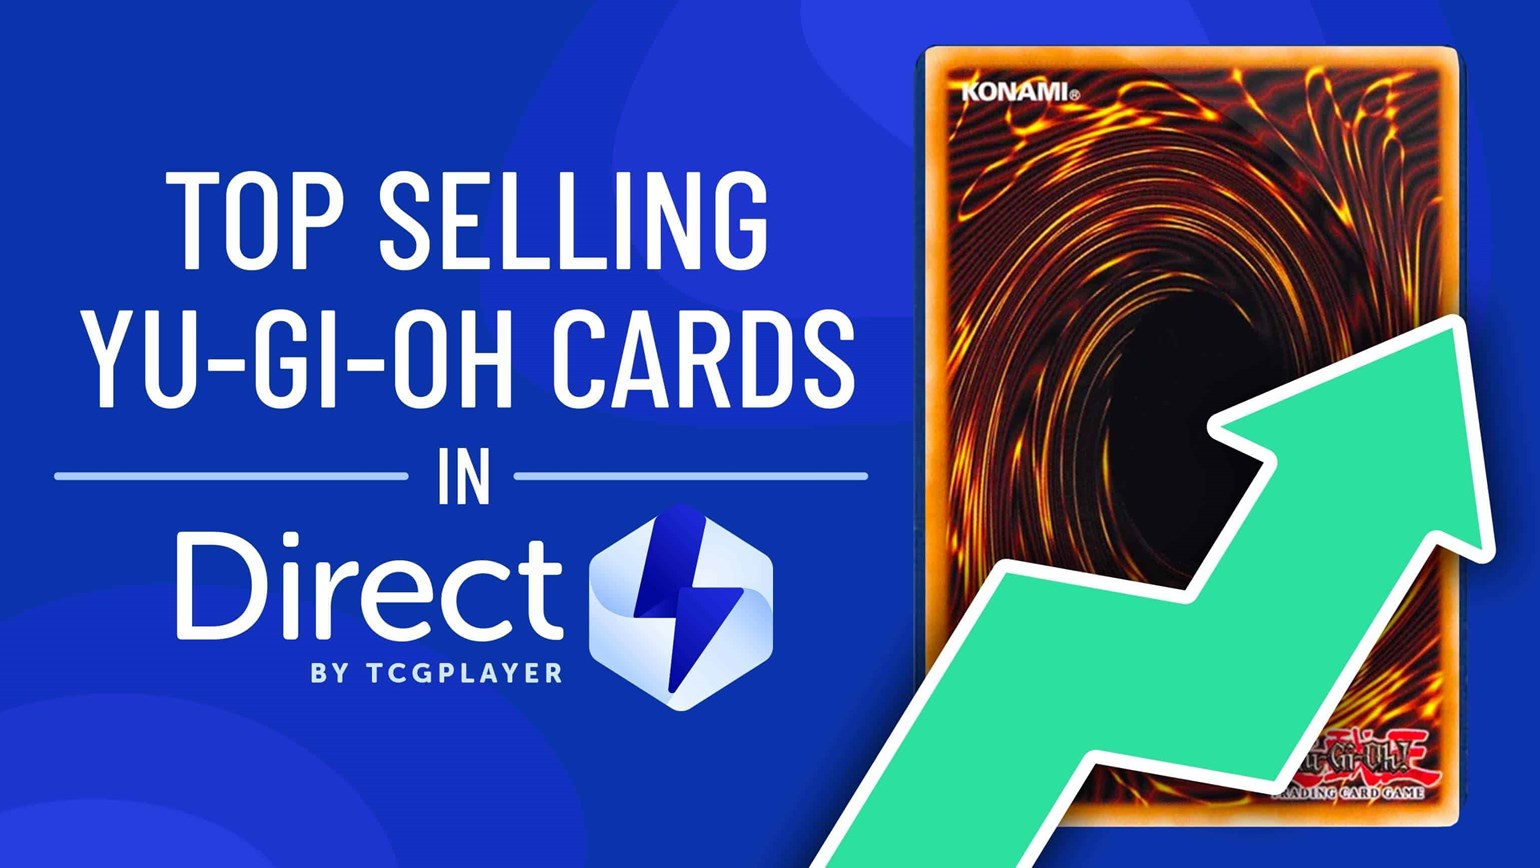 July Top Selling Yu-Gi-Oh! Cards in Direct by TCGplayer